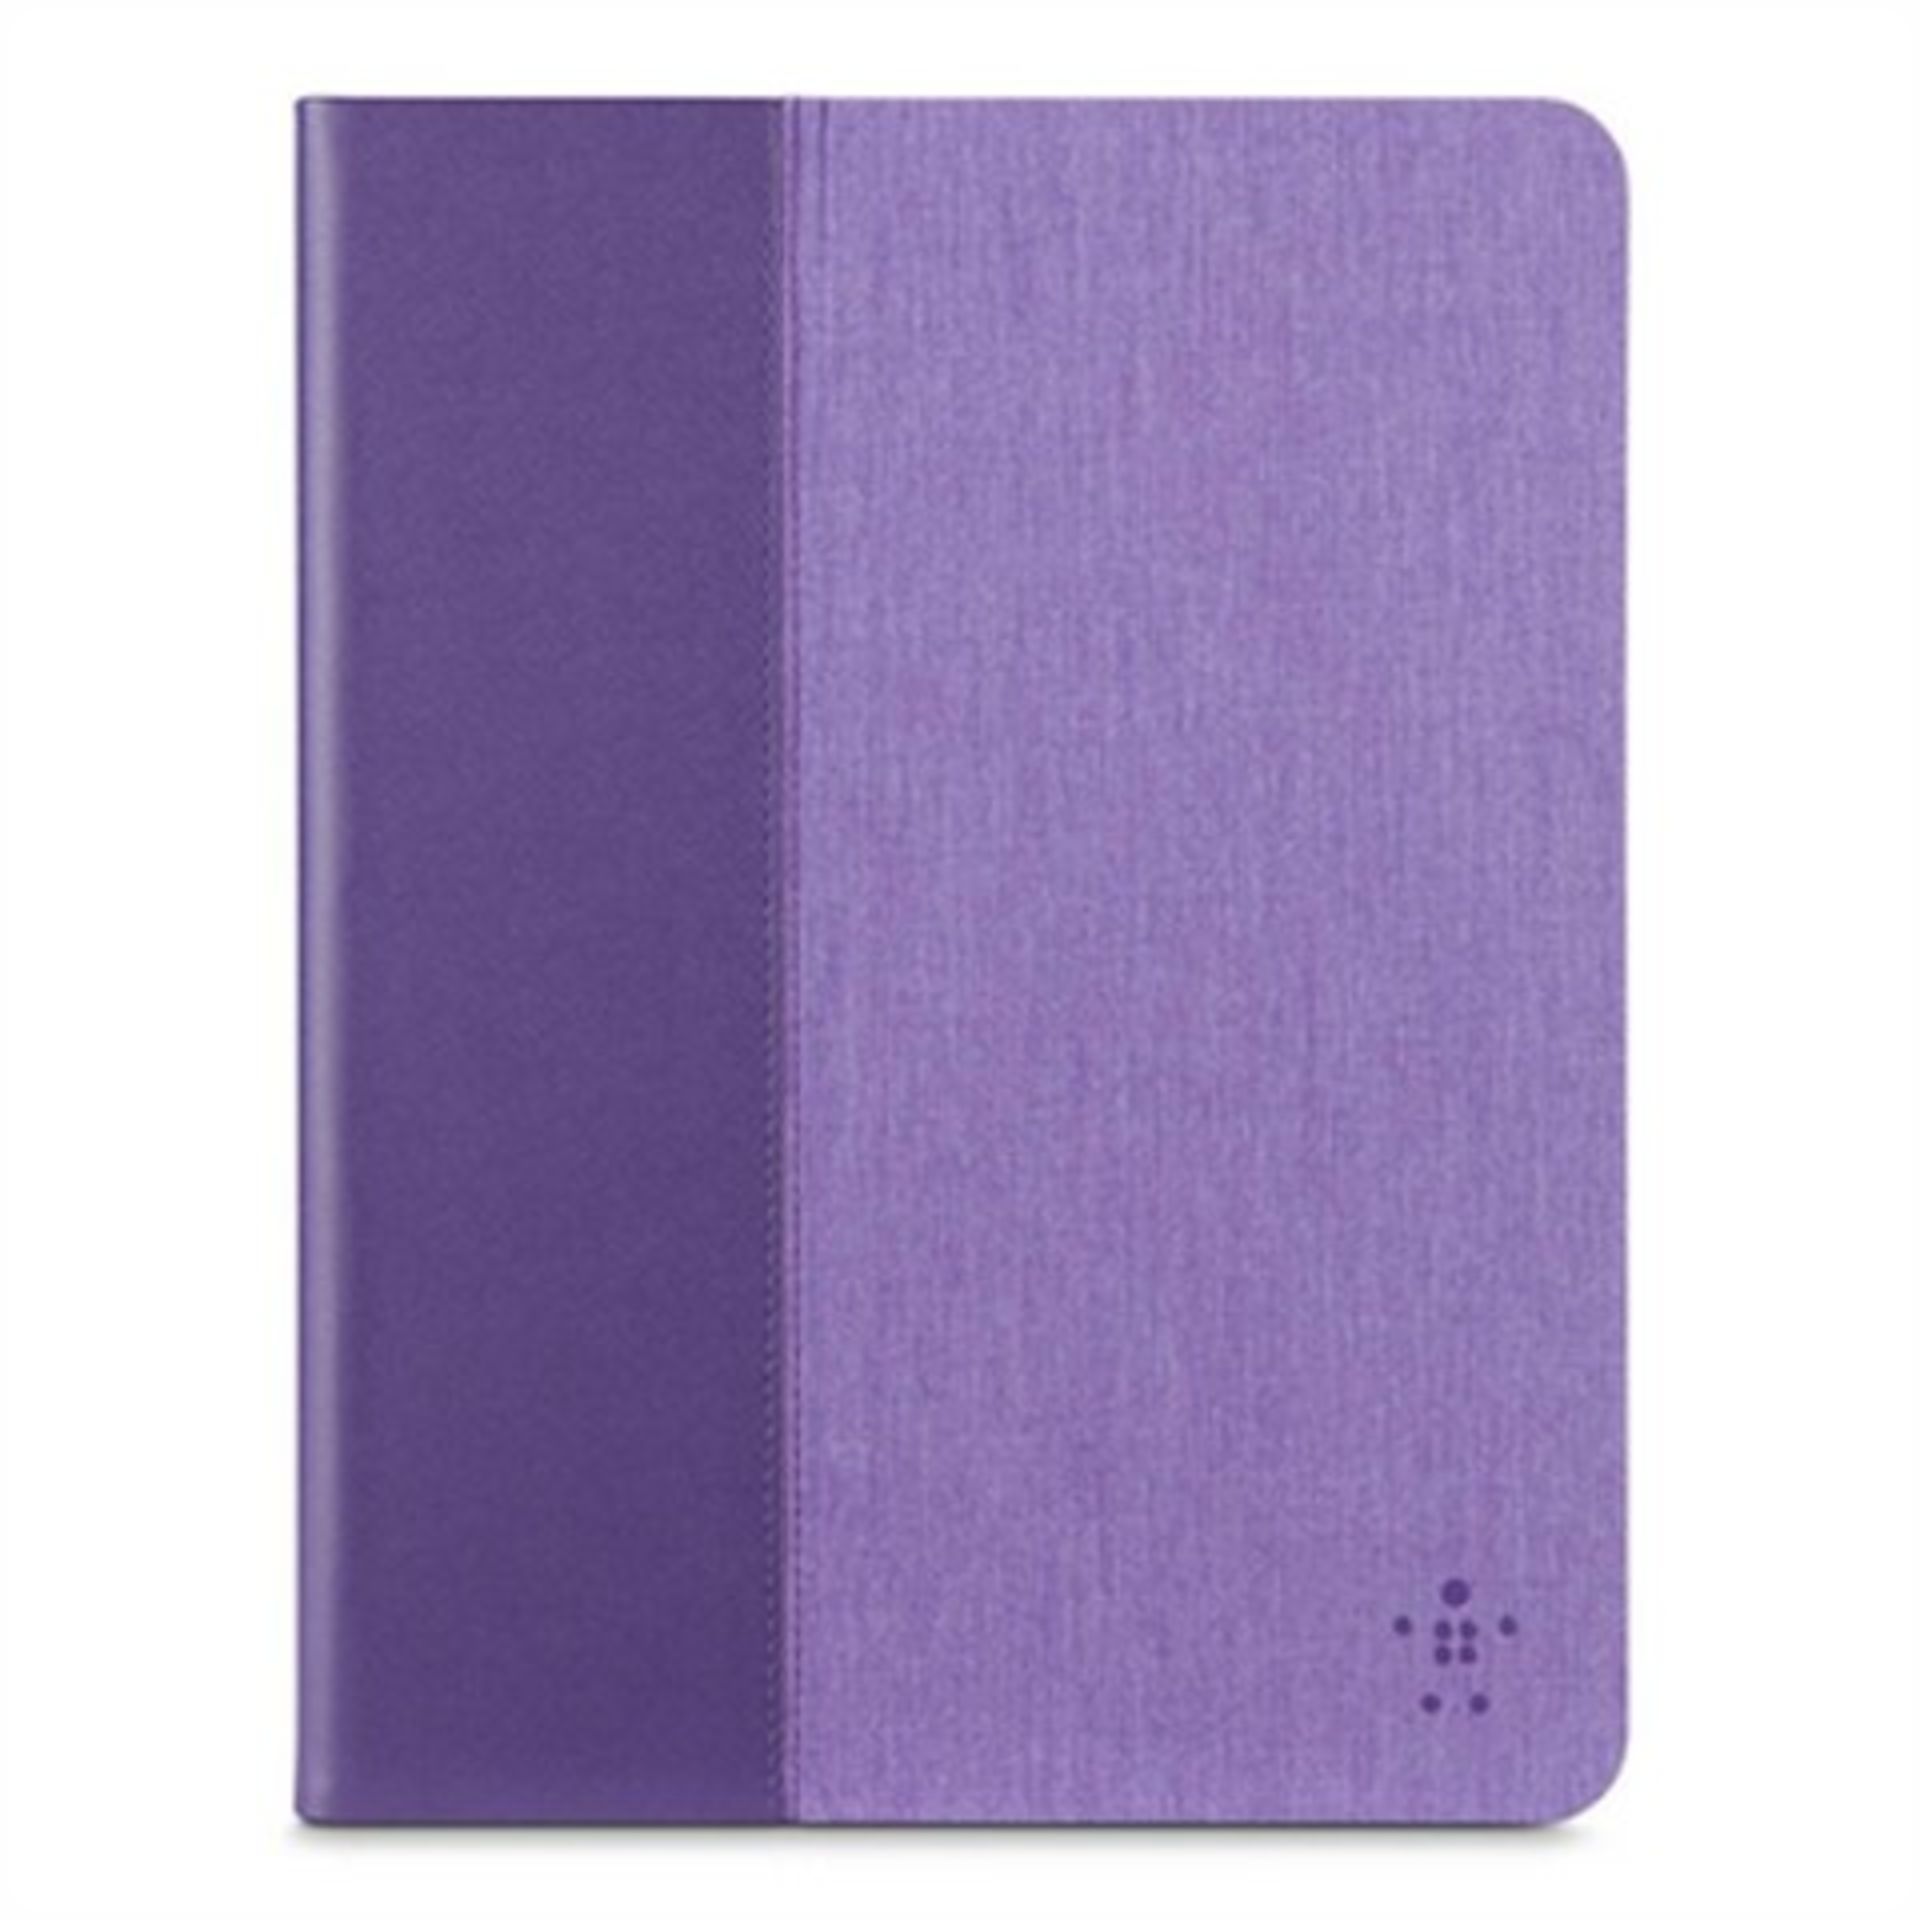 V Brand New Belkin Purple Chambray Cover For iPad Air & iPad Air 2 - Slim Design - Made For